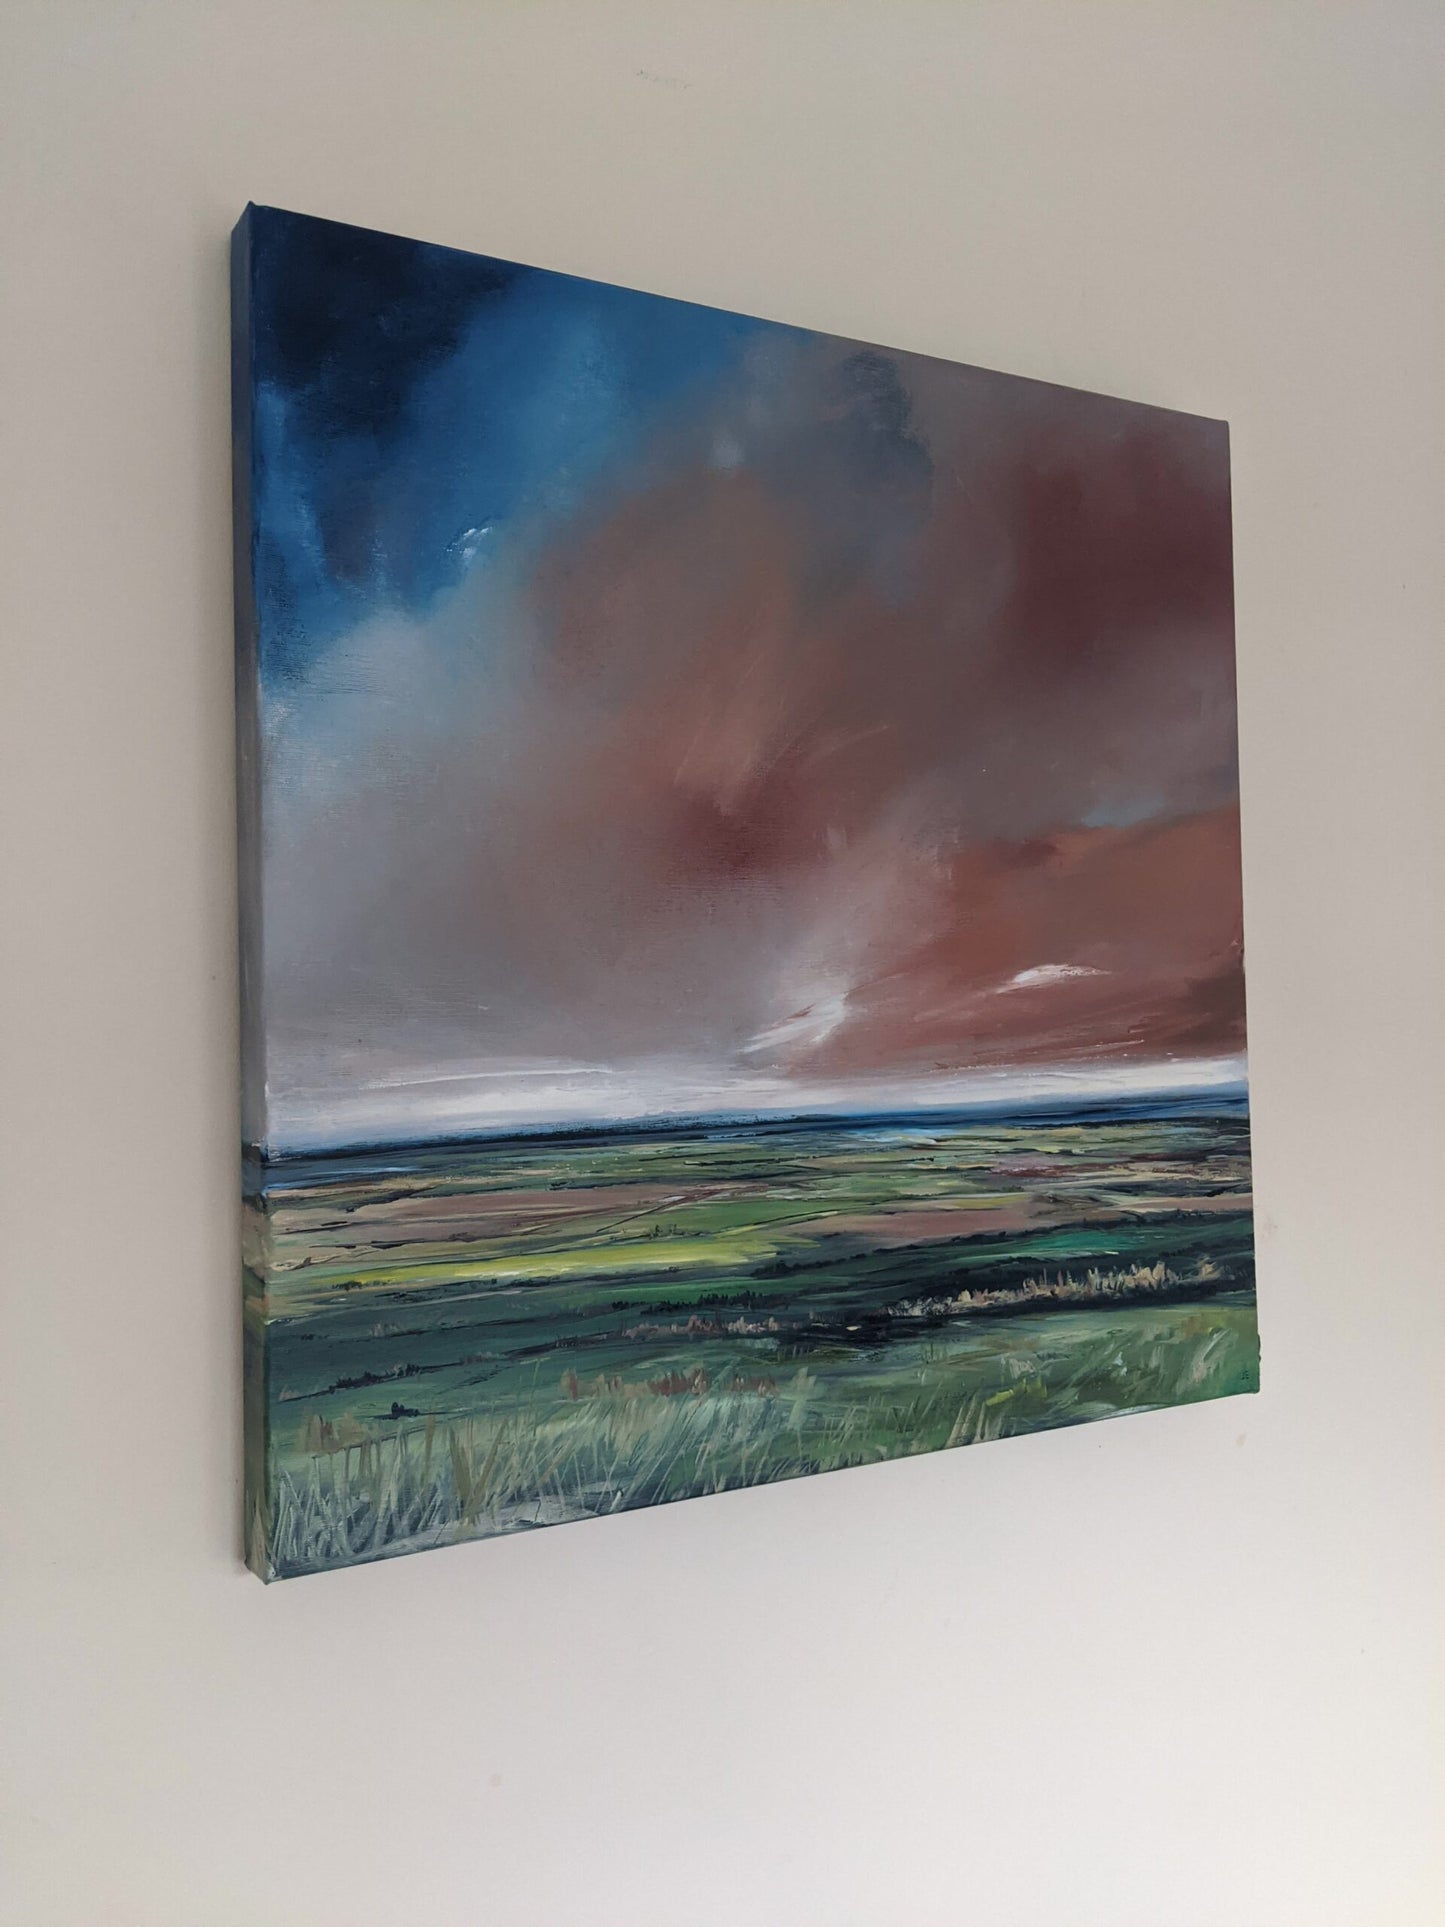 Coombe Hill, Buckinghamshire Landscape oil painting on canvas interior view, by Jo Earl